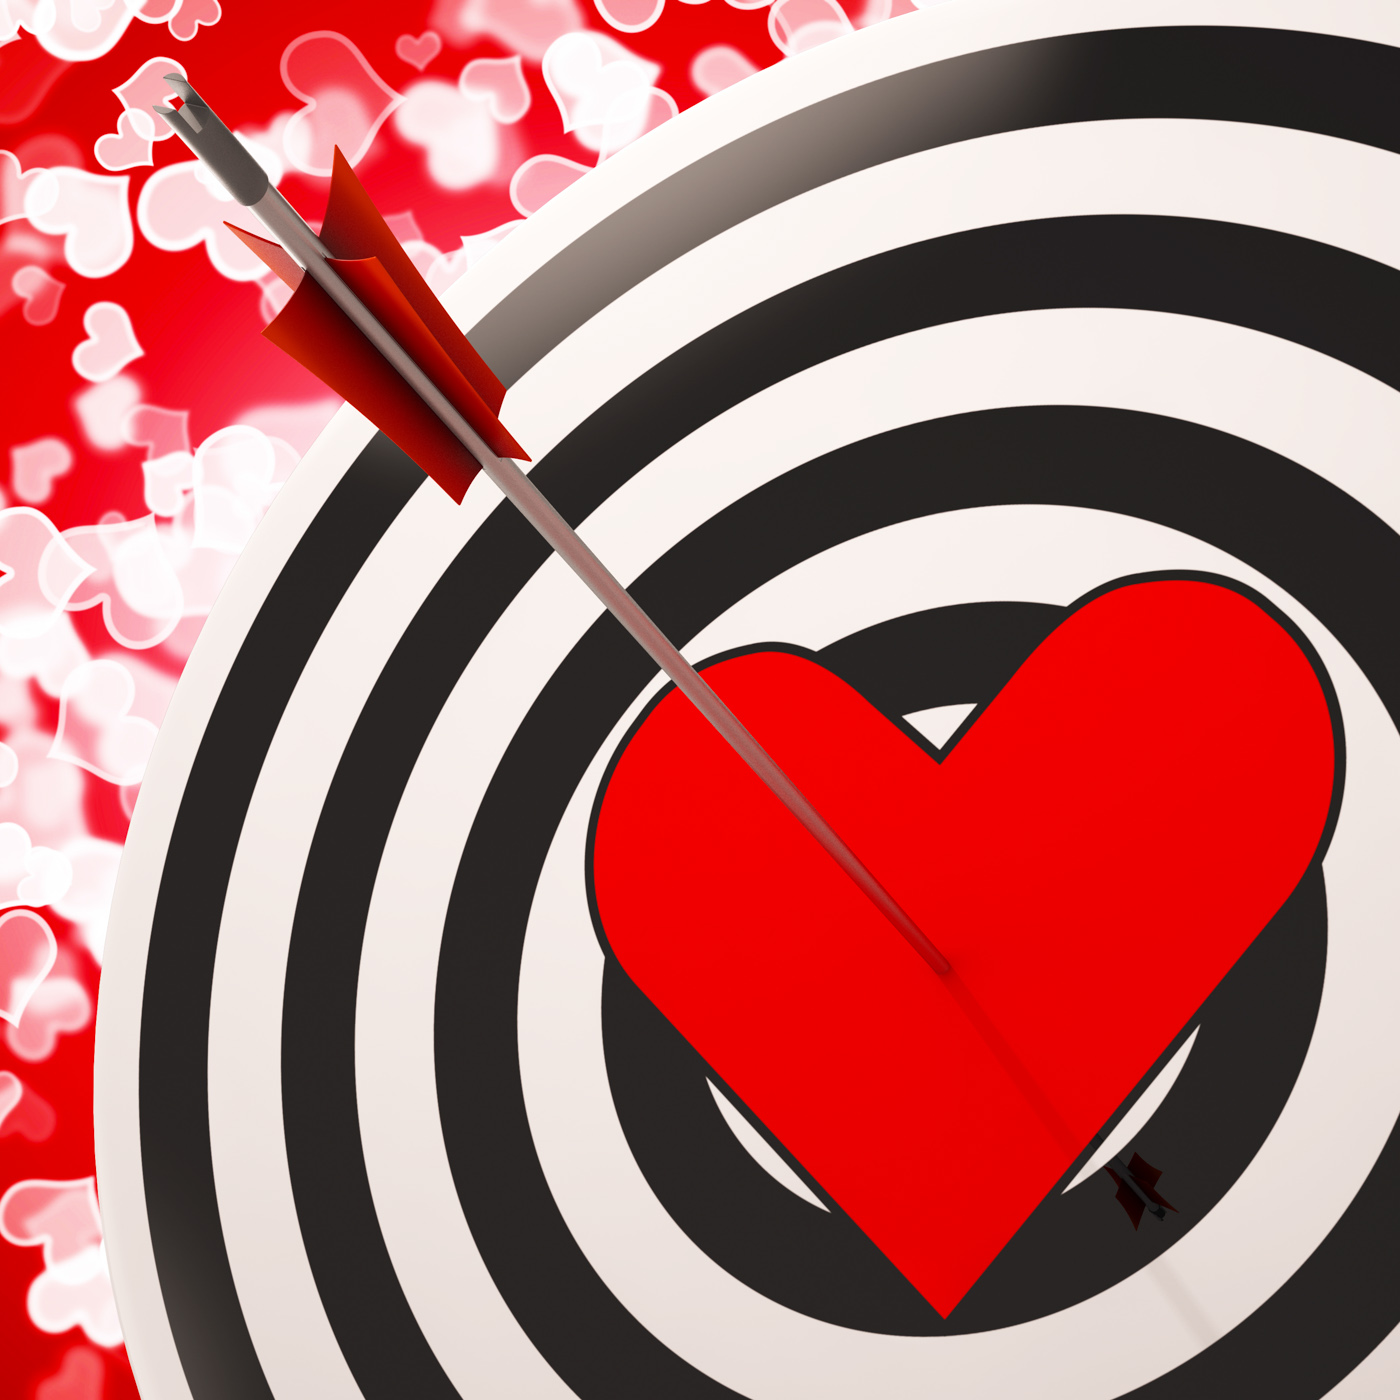 Heart target shows success in romance photo